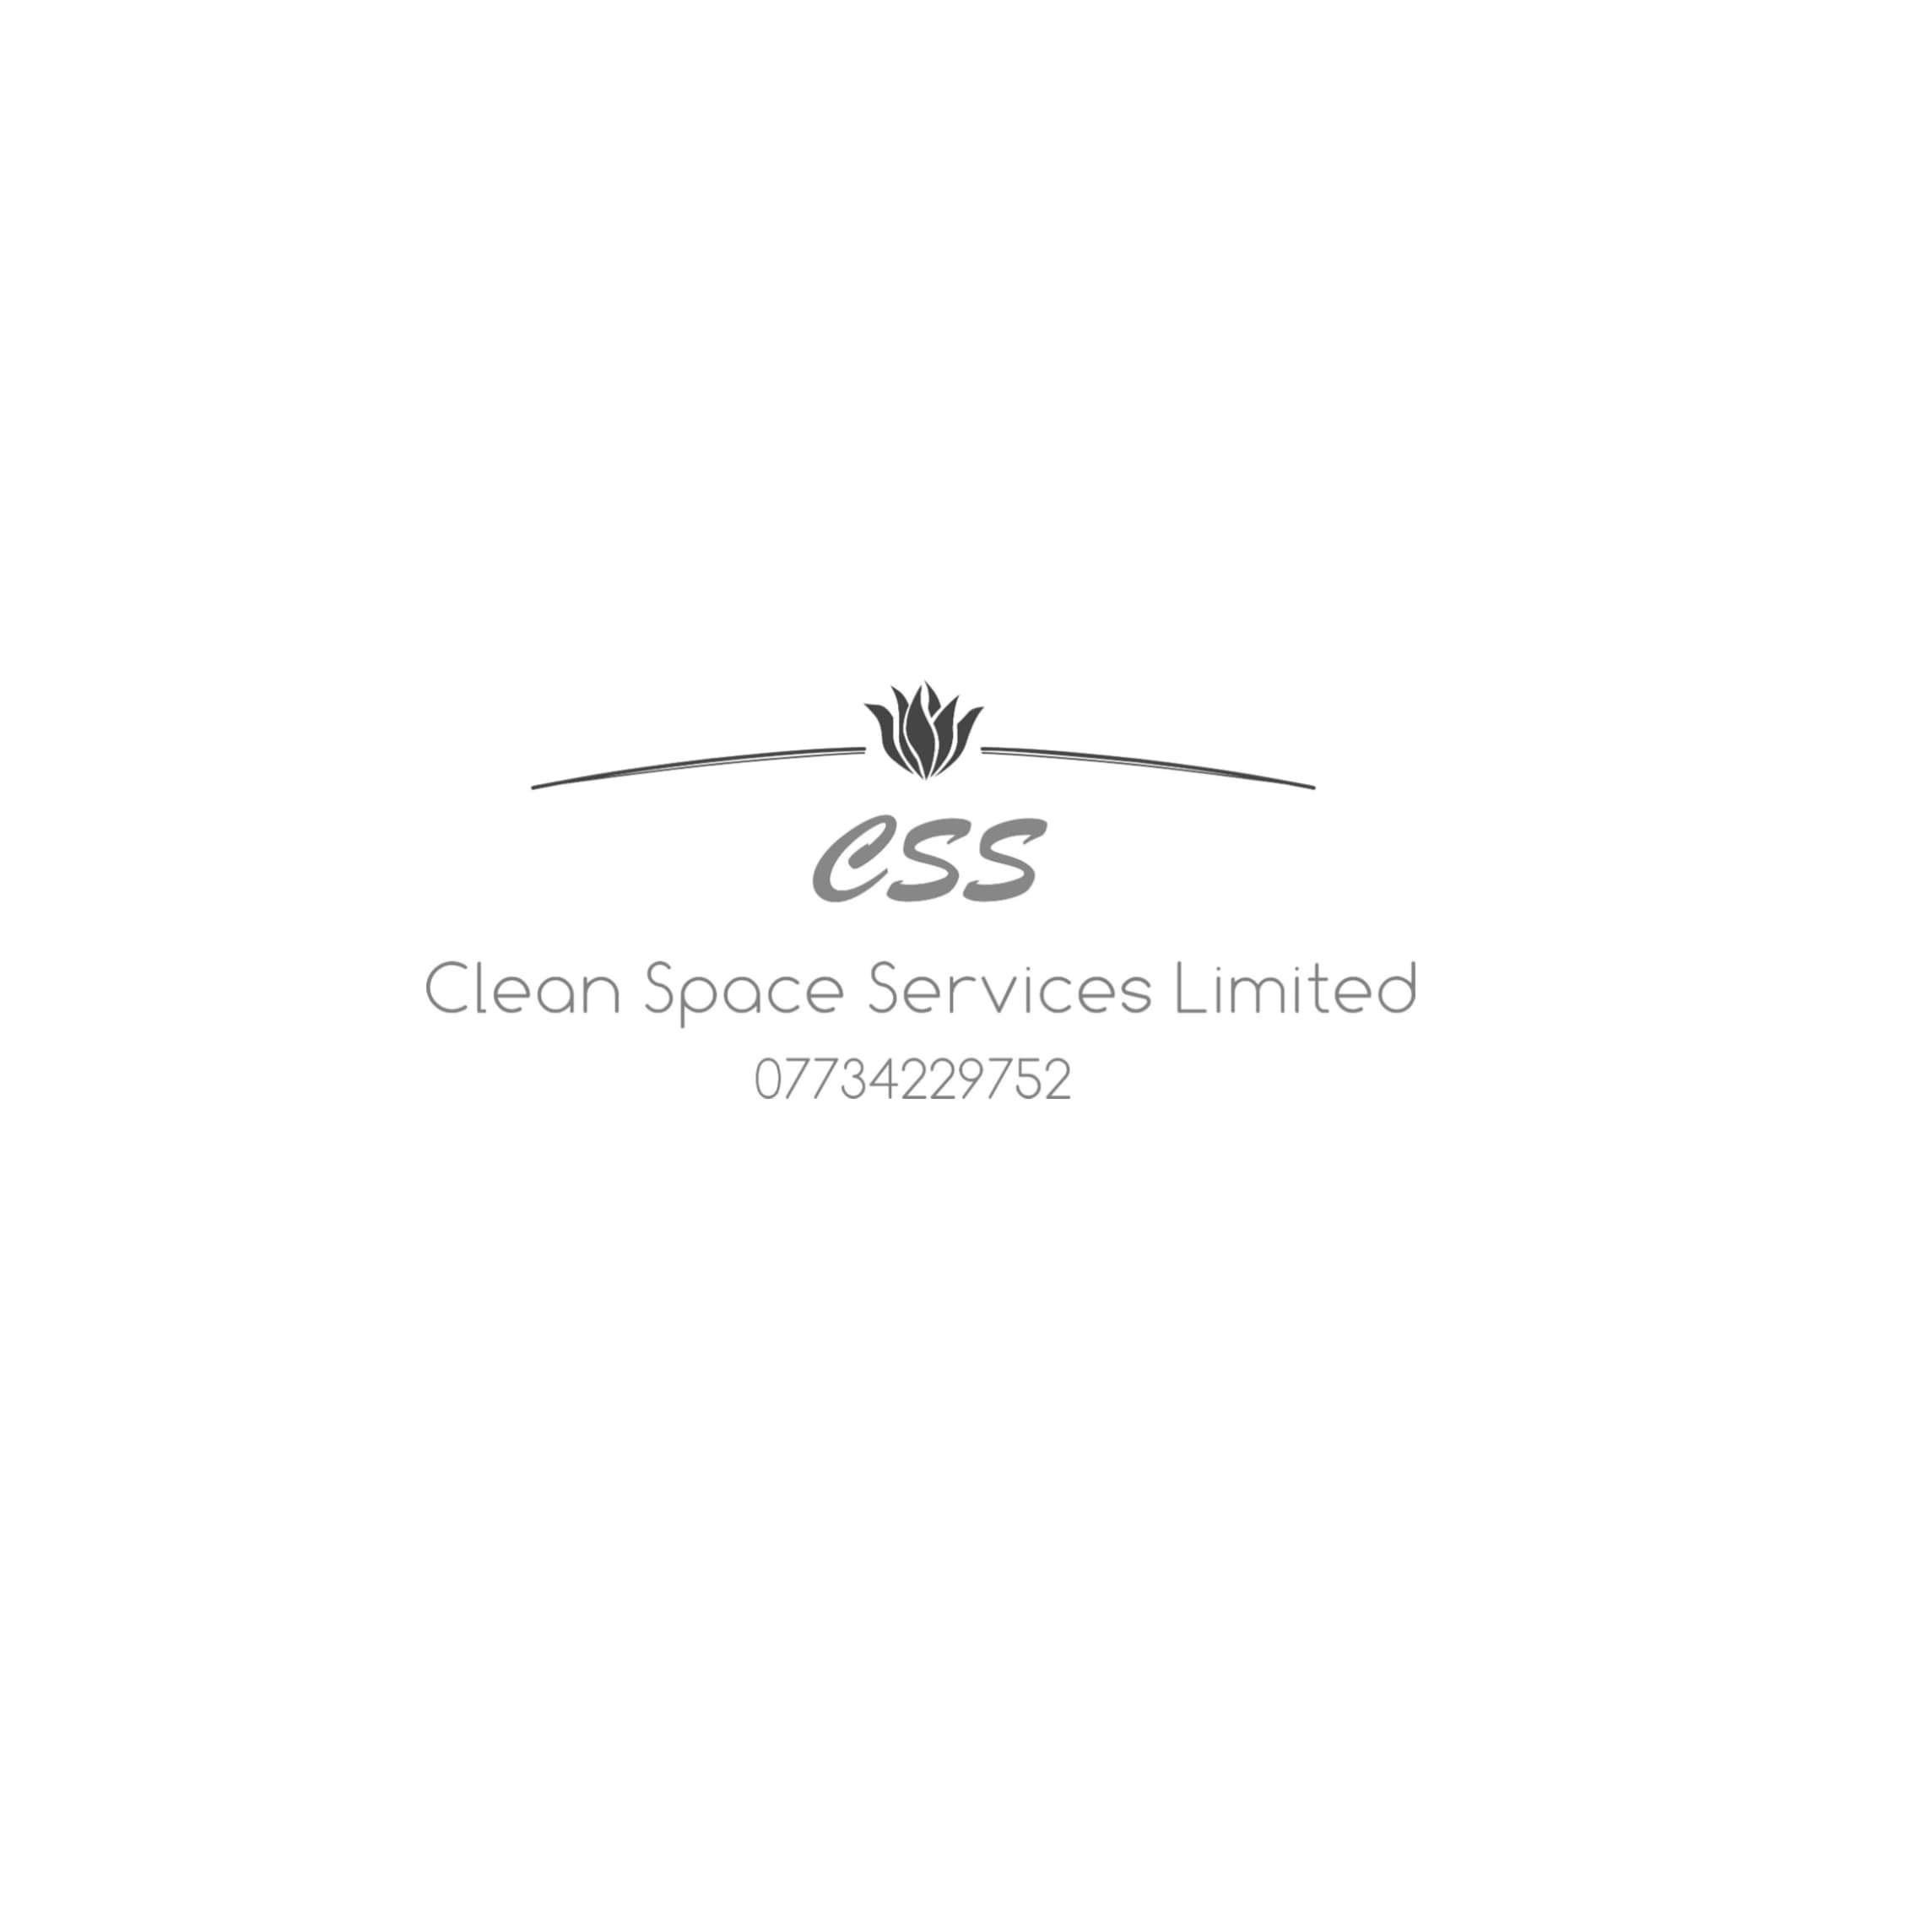 Clean Space Services Limited